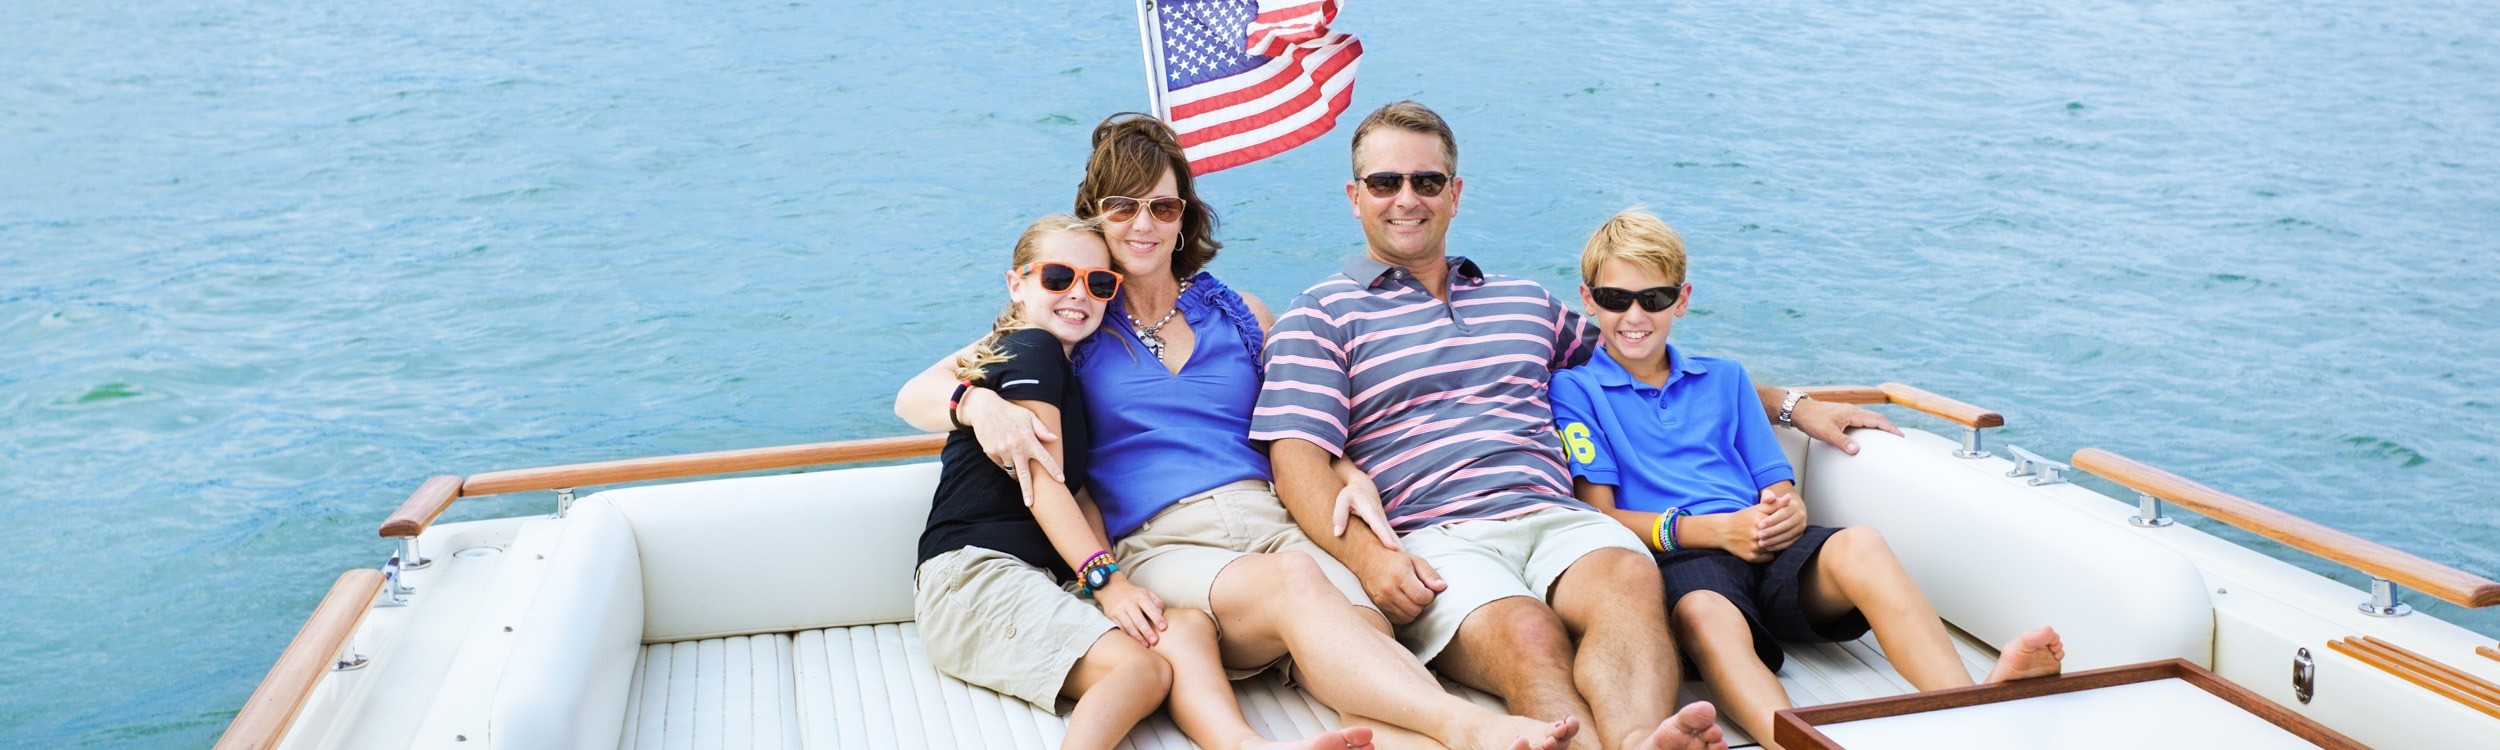 family of 4 sitting together on a boat